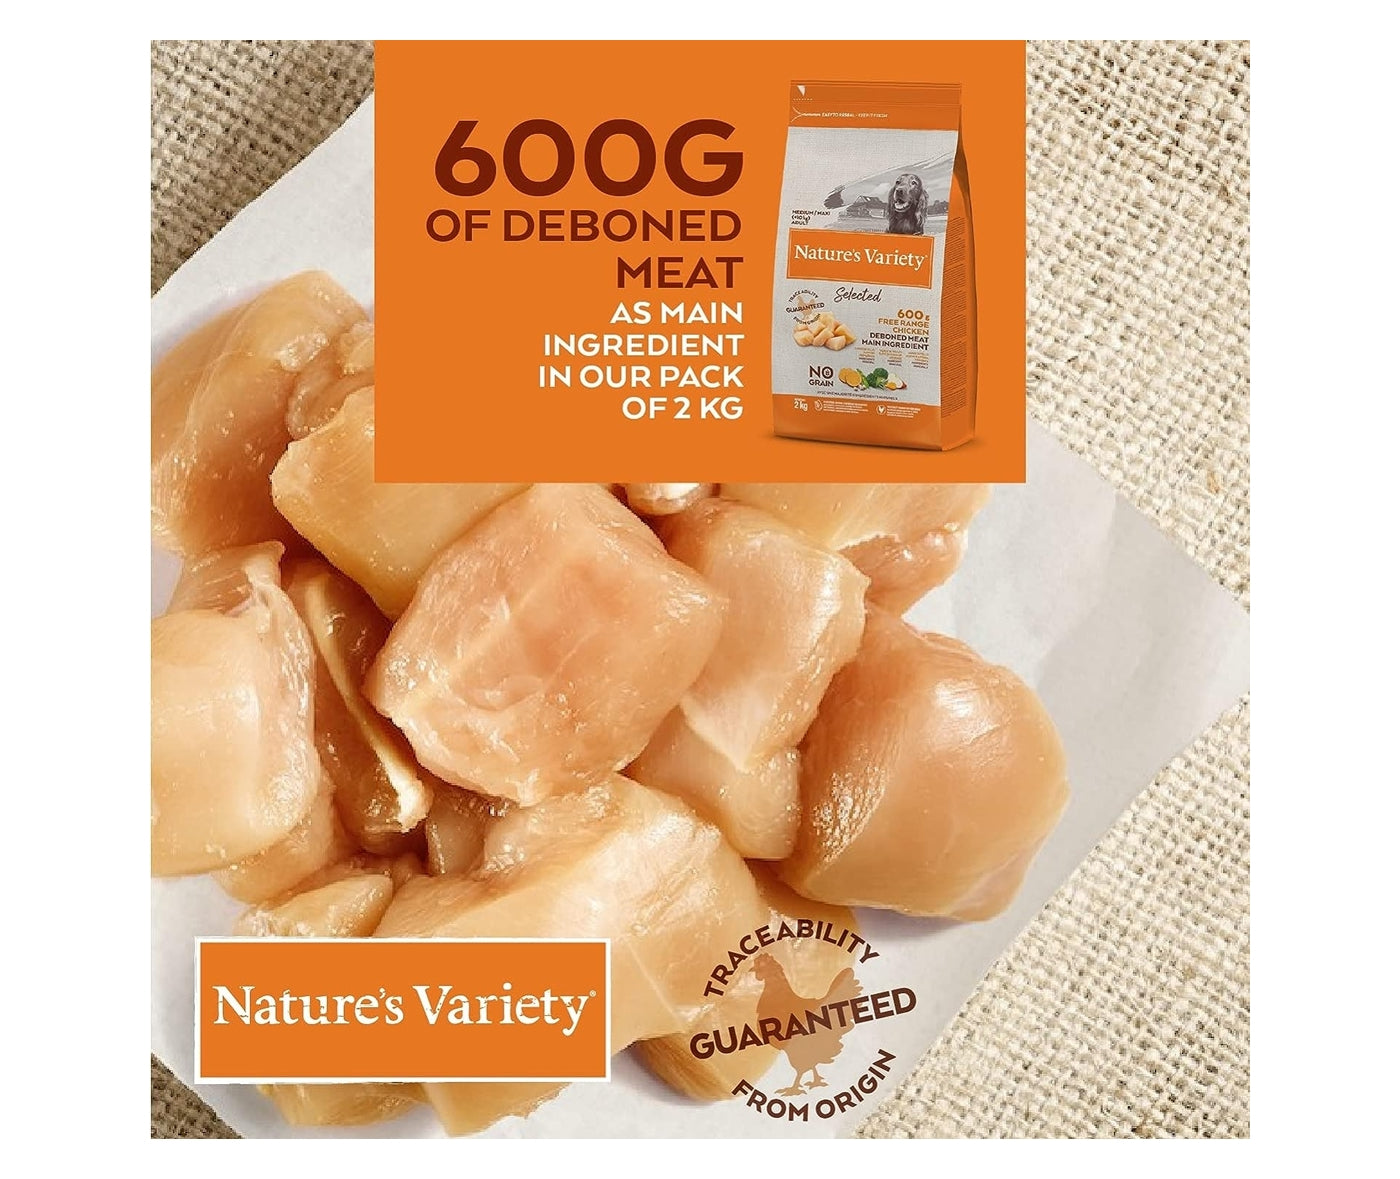 Natures Variety - Selected Free Range Chicken for Adult Dogs - 2kg